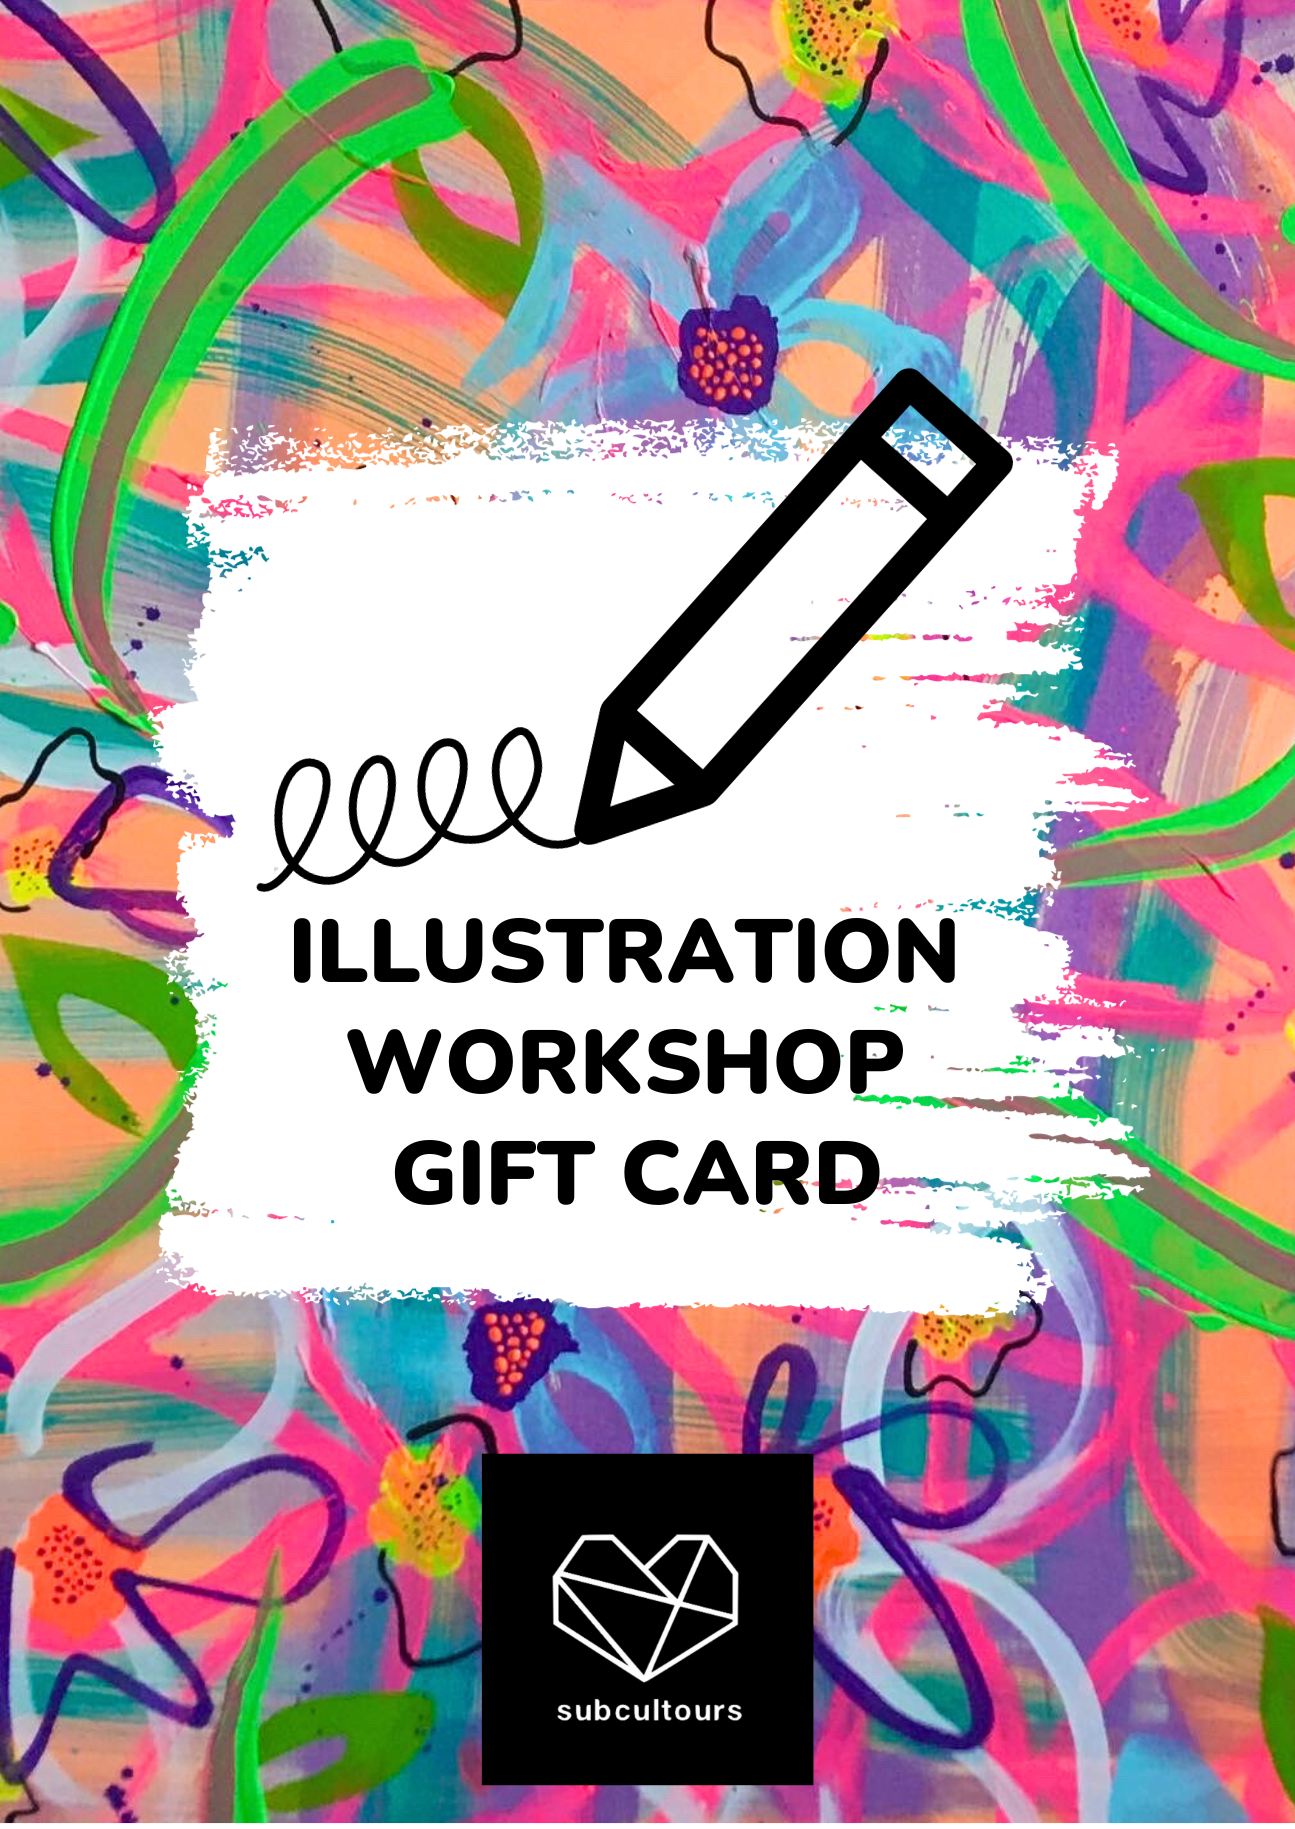 Illustration Workshop gift card by subcultours